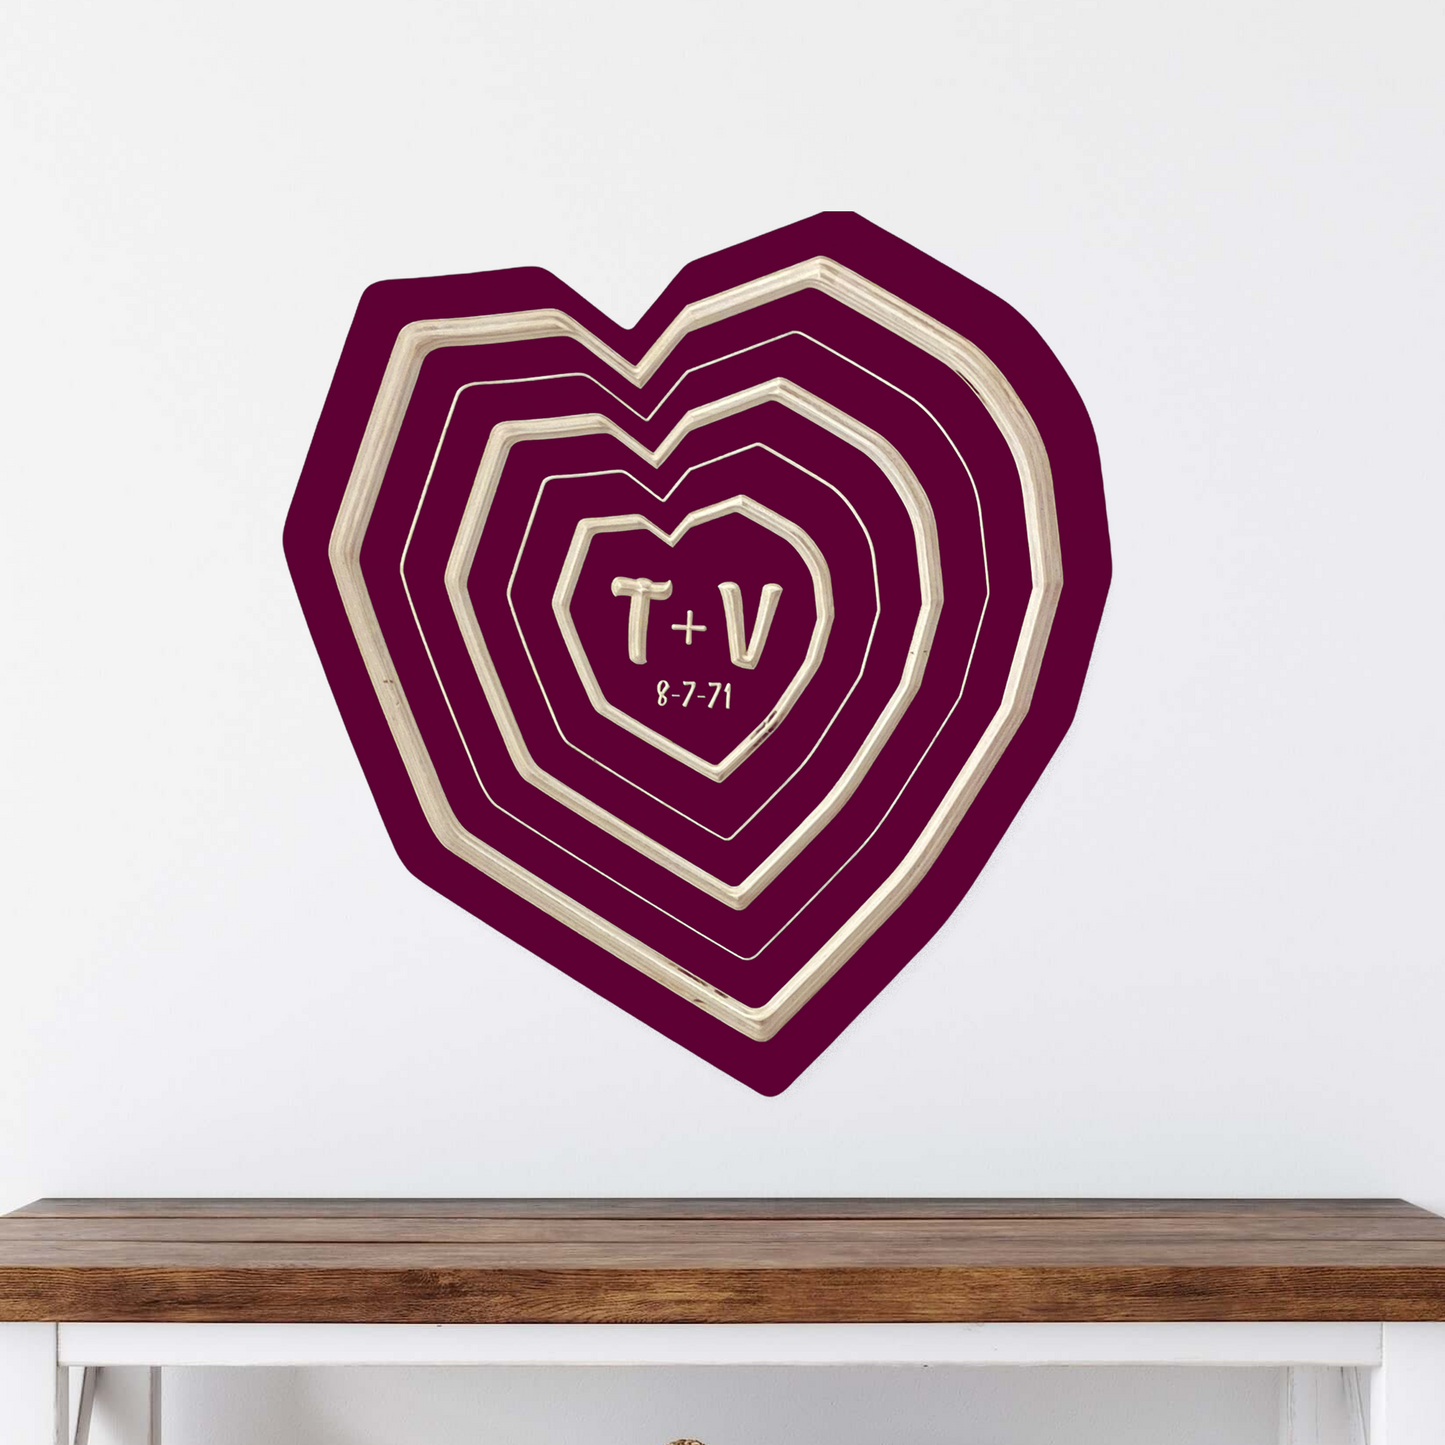 Initials Carved in Wooden Heart | Bespoke Art Made from Wood